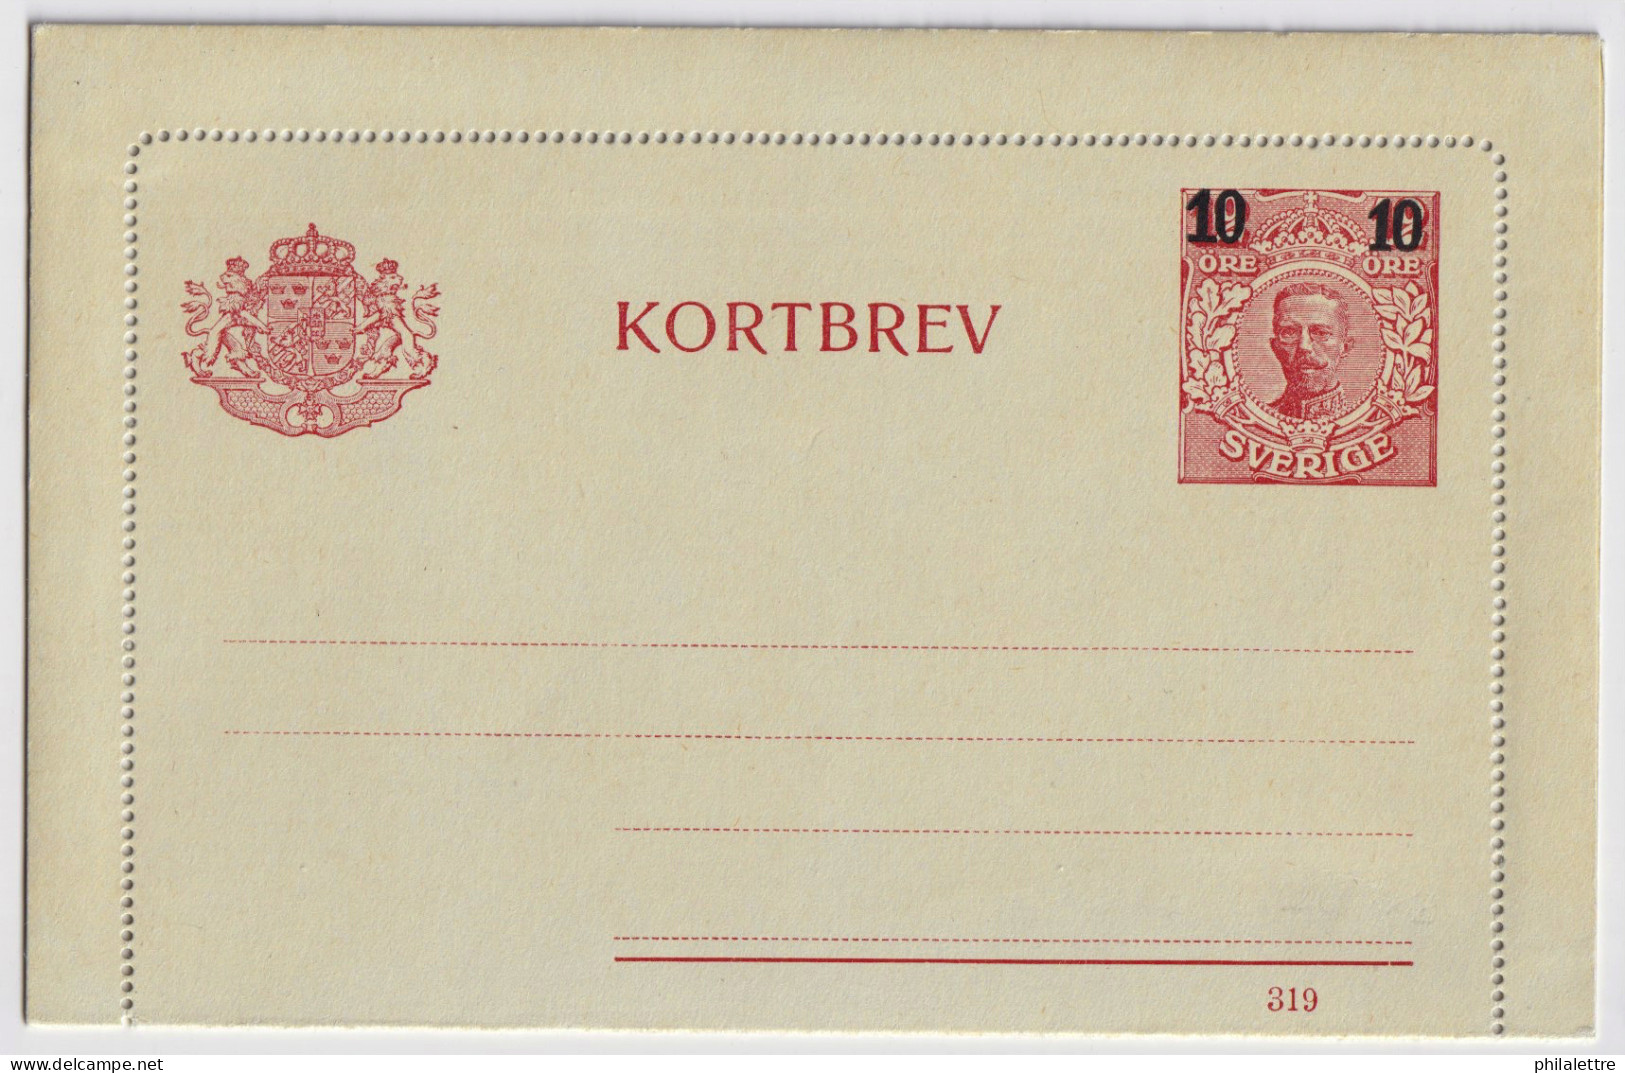 SUÈDE / SWEDEN - 1919 - Letter-Card Mi.K16 10/12ö Red (d.319) T.I Thick "10" On Yellowish Card - Unused - Very Fine - Postal Stationery